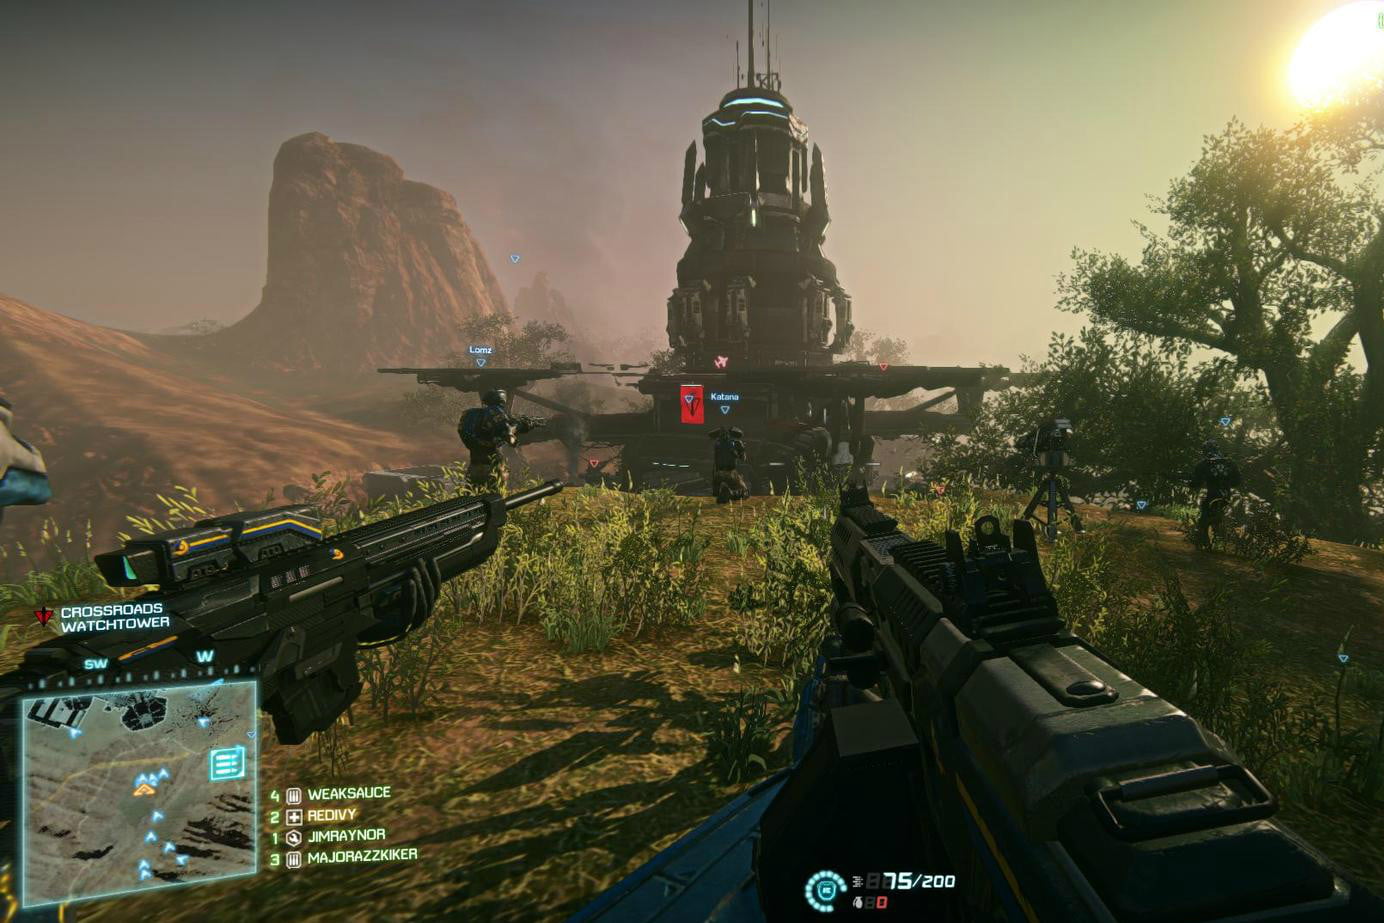 free shooter games pc download